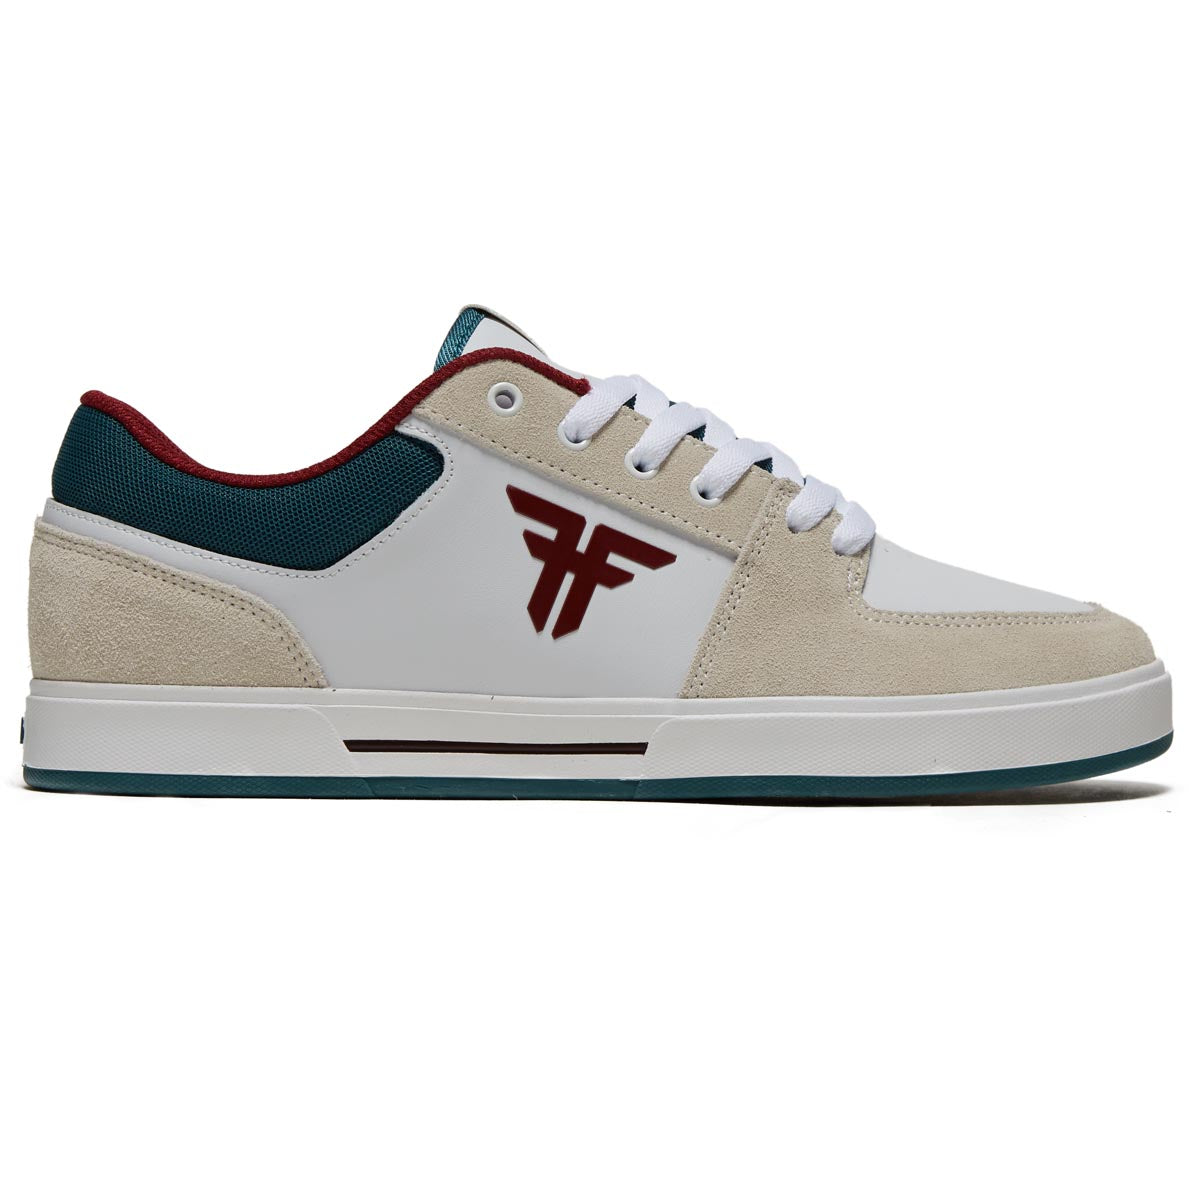 Fallen Patriot Shoes - White/Teal/Burgundy image 1